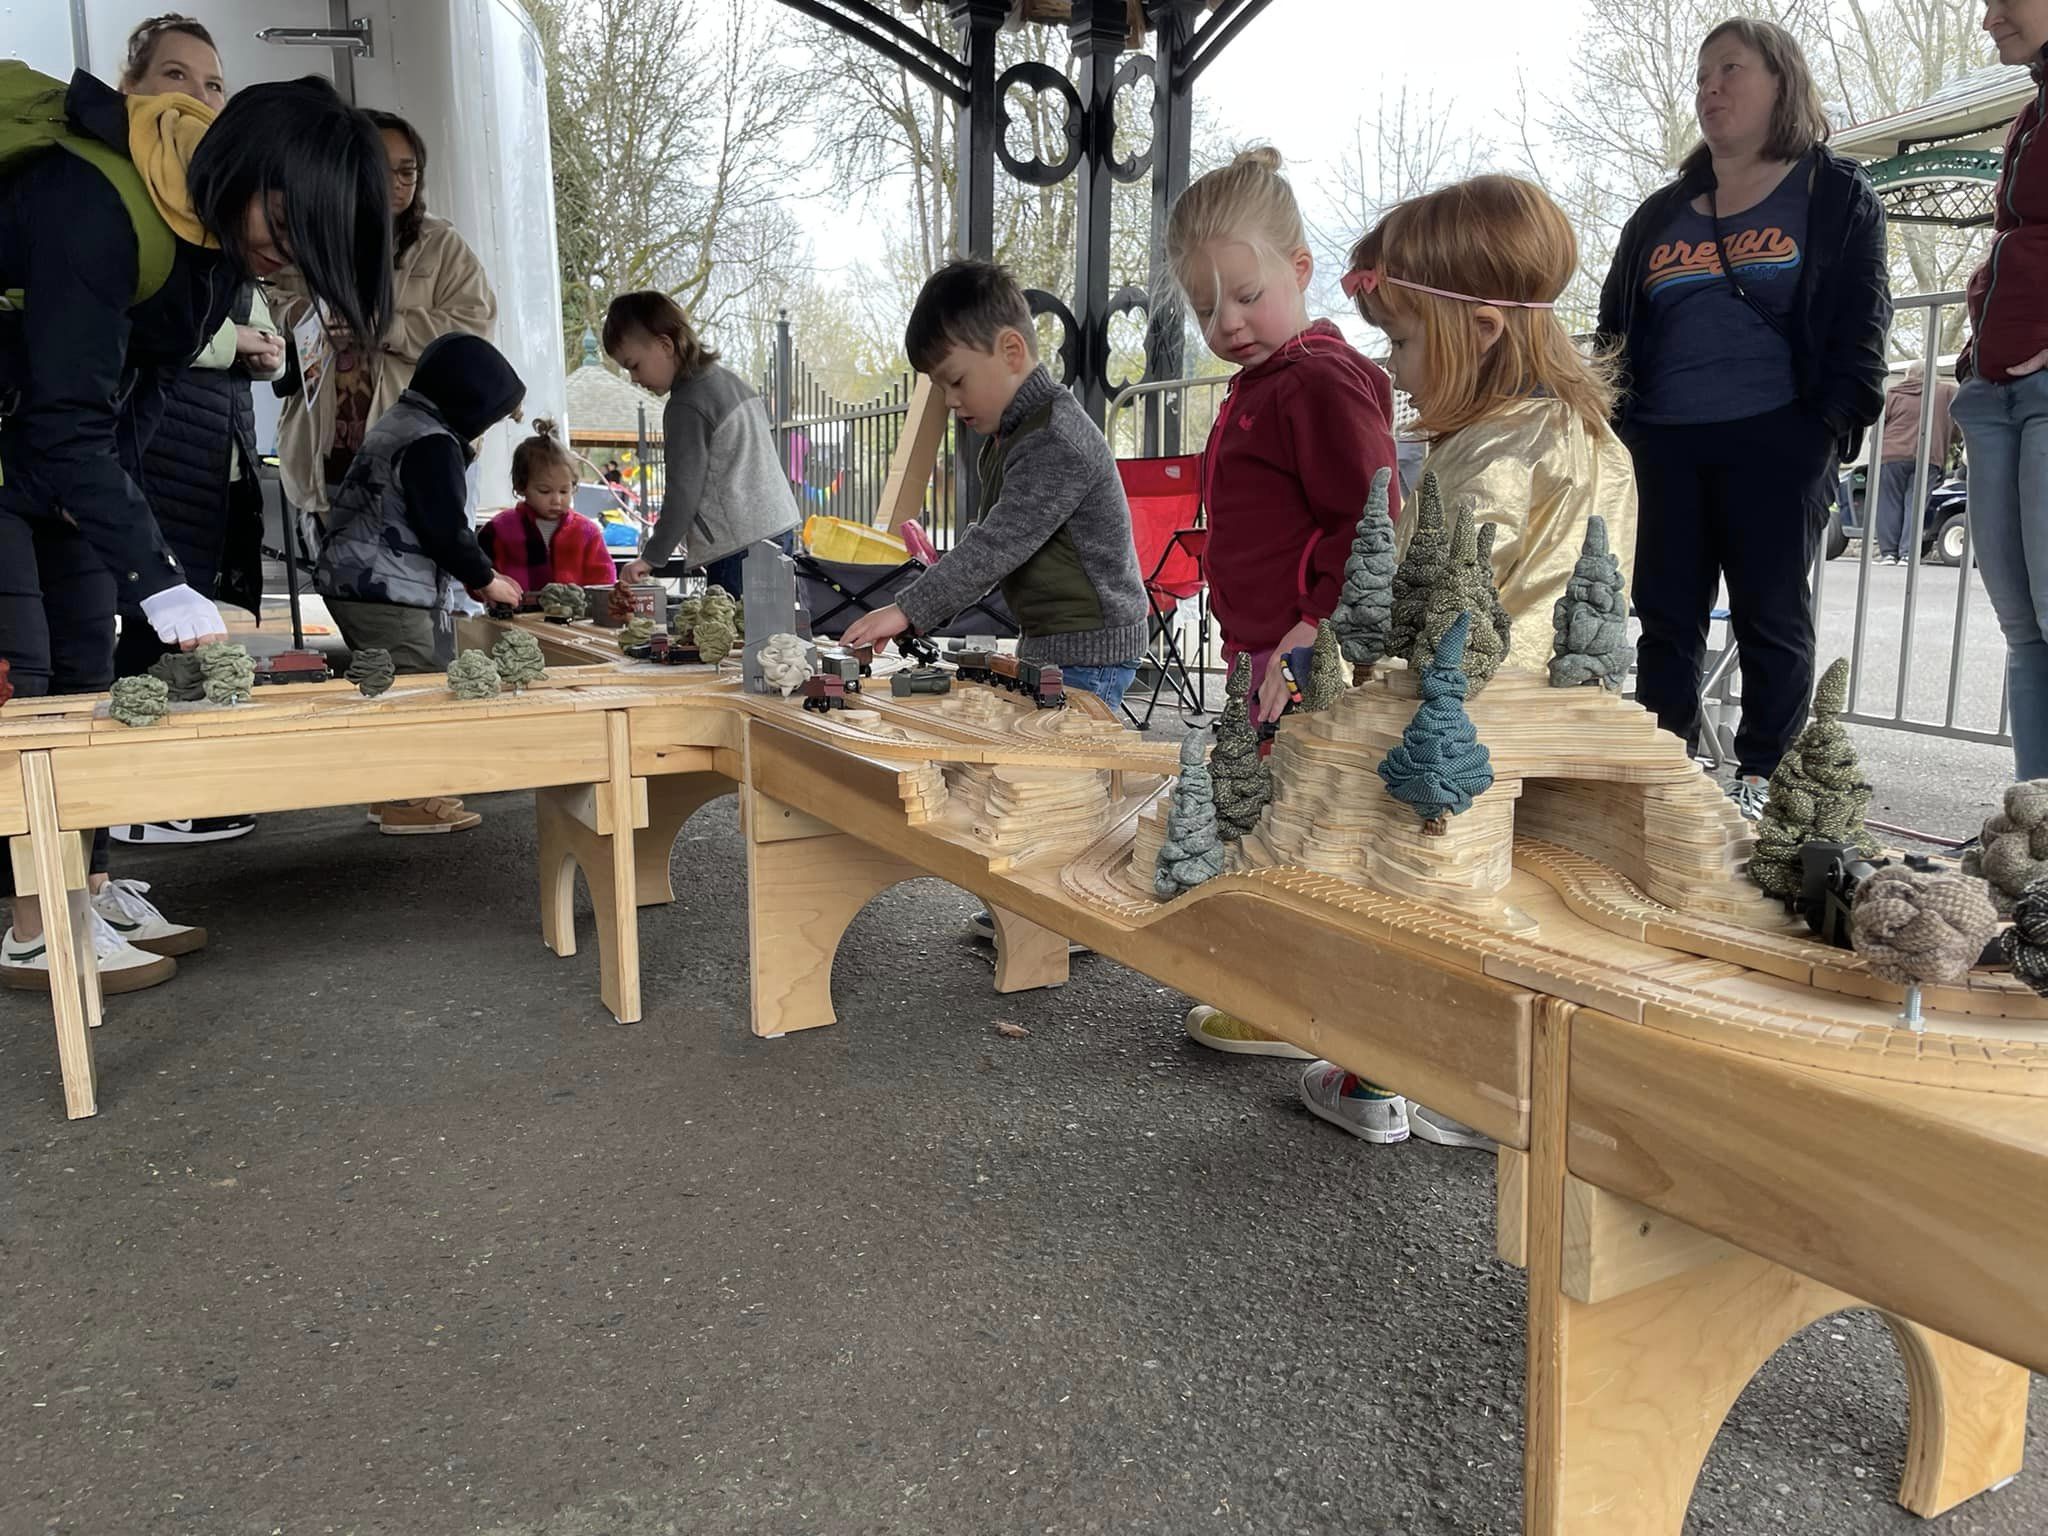 Tiny engineers on a big adventure - kids conquering the mini railroad world!